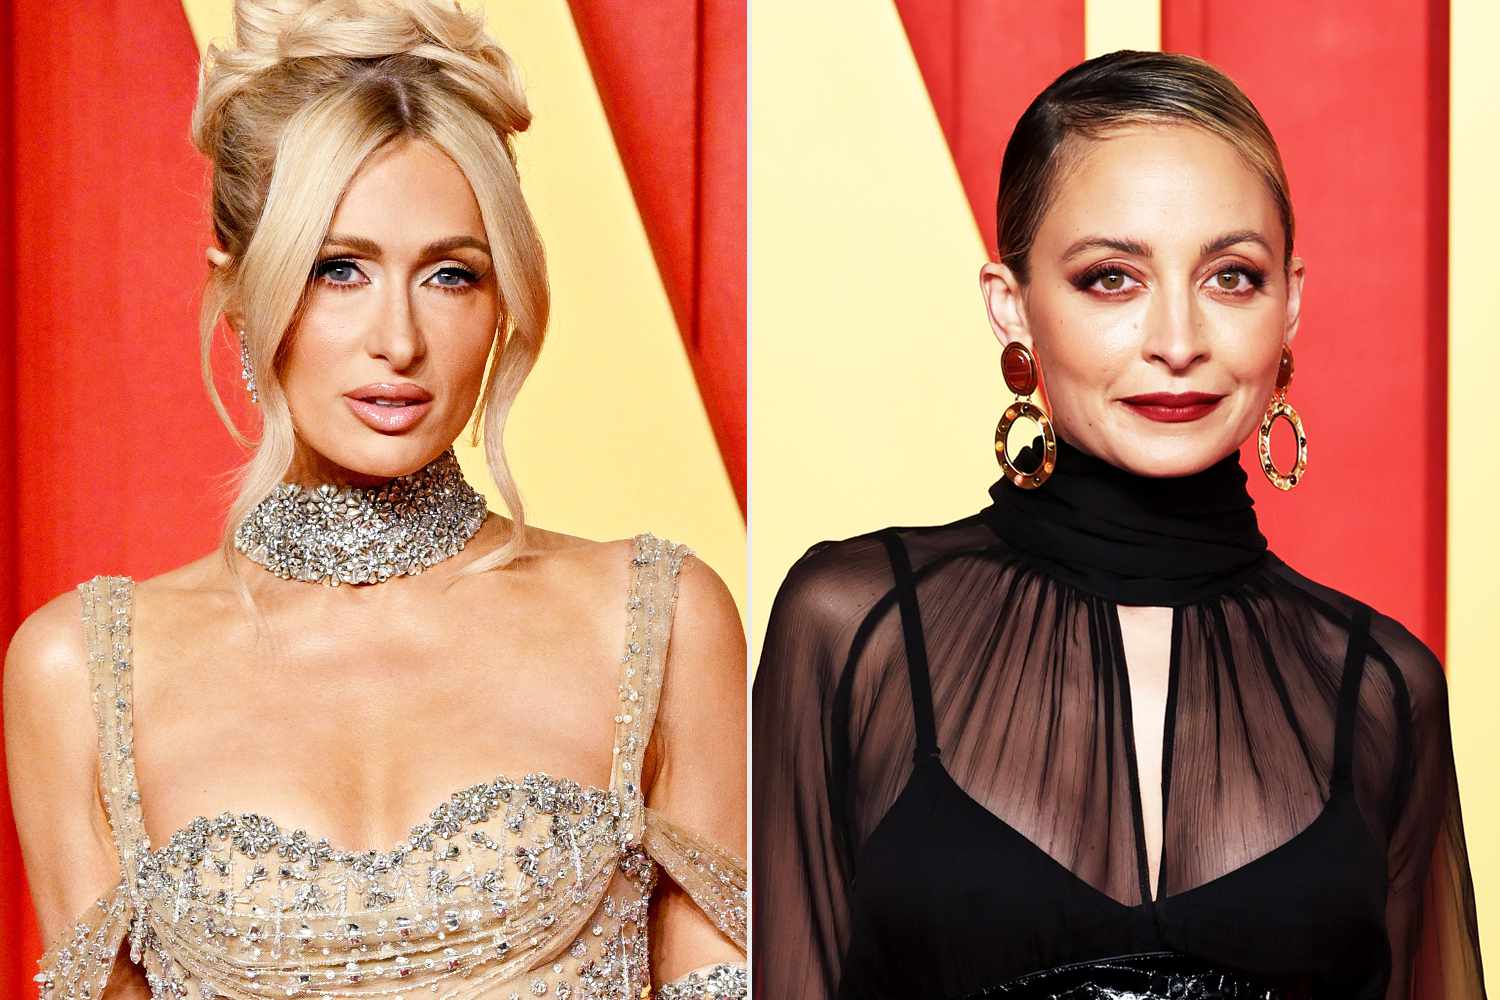 Paris Hilton and Nicole Richie Reuniting for New Reality Series 17 Years After “The Simple Life ”Ended